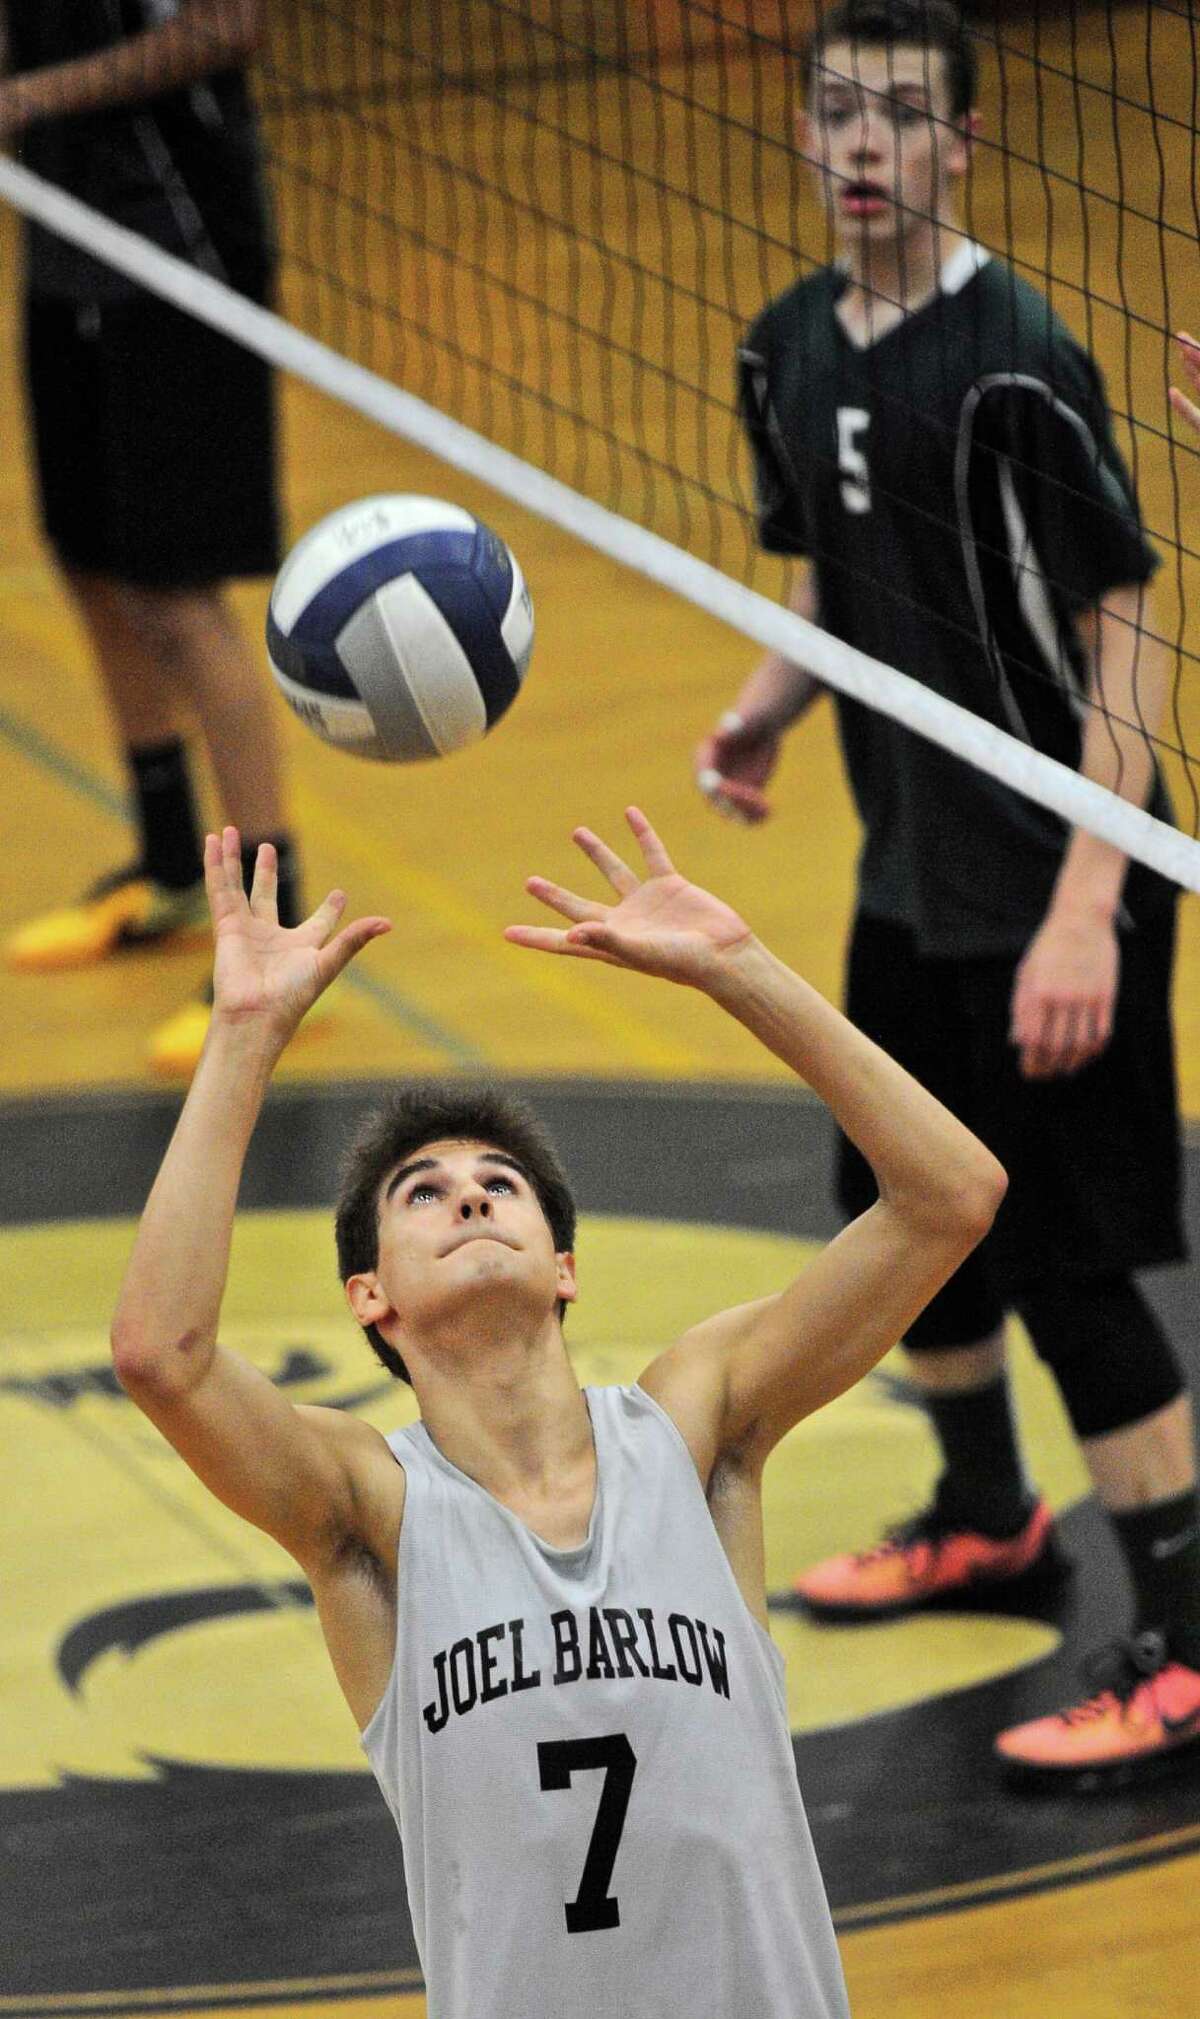 Joel Barlow's Austin Houser (7) sets the ball in the State Class M boys volleyball quarterfinal game between Enfield and Joel Barlow high schools, on Friday night, June 3, 2016, at Joel Barlow High School, Redding, Conn.